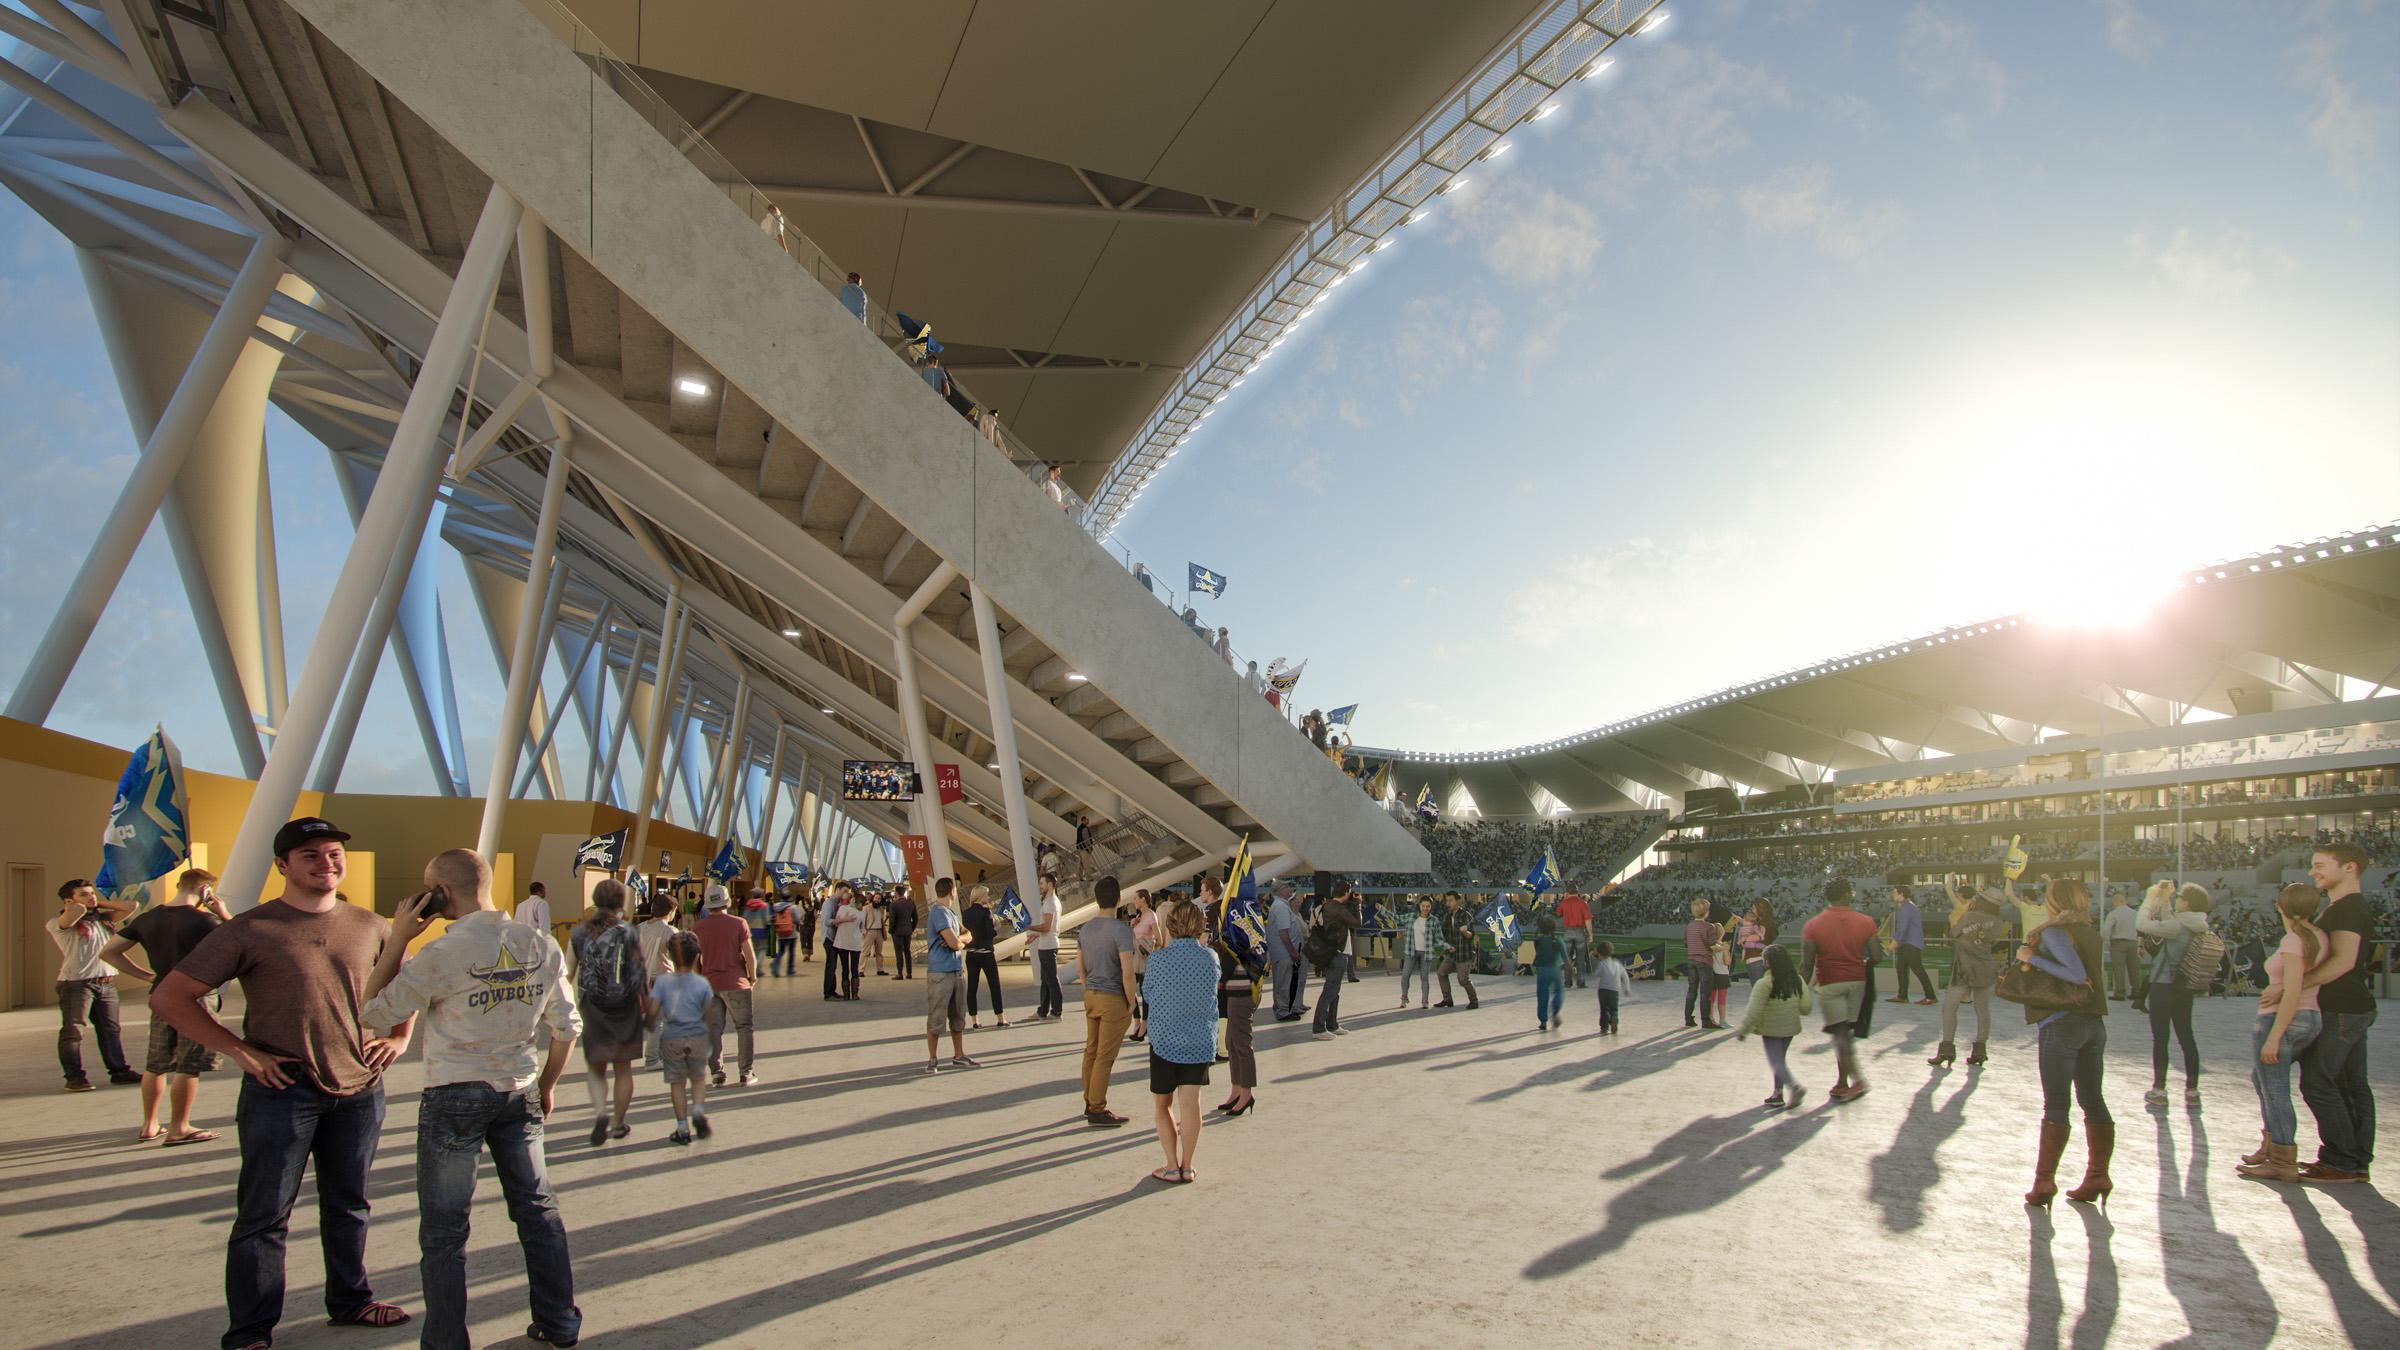 Computer-rendered ground view of Townsville Stadium, with people walking around the arena